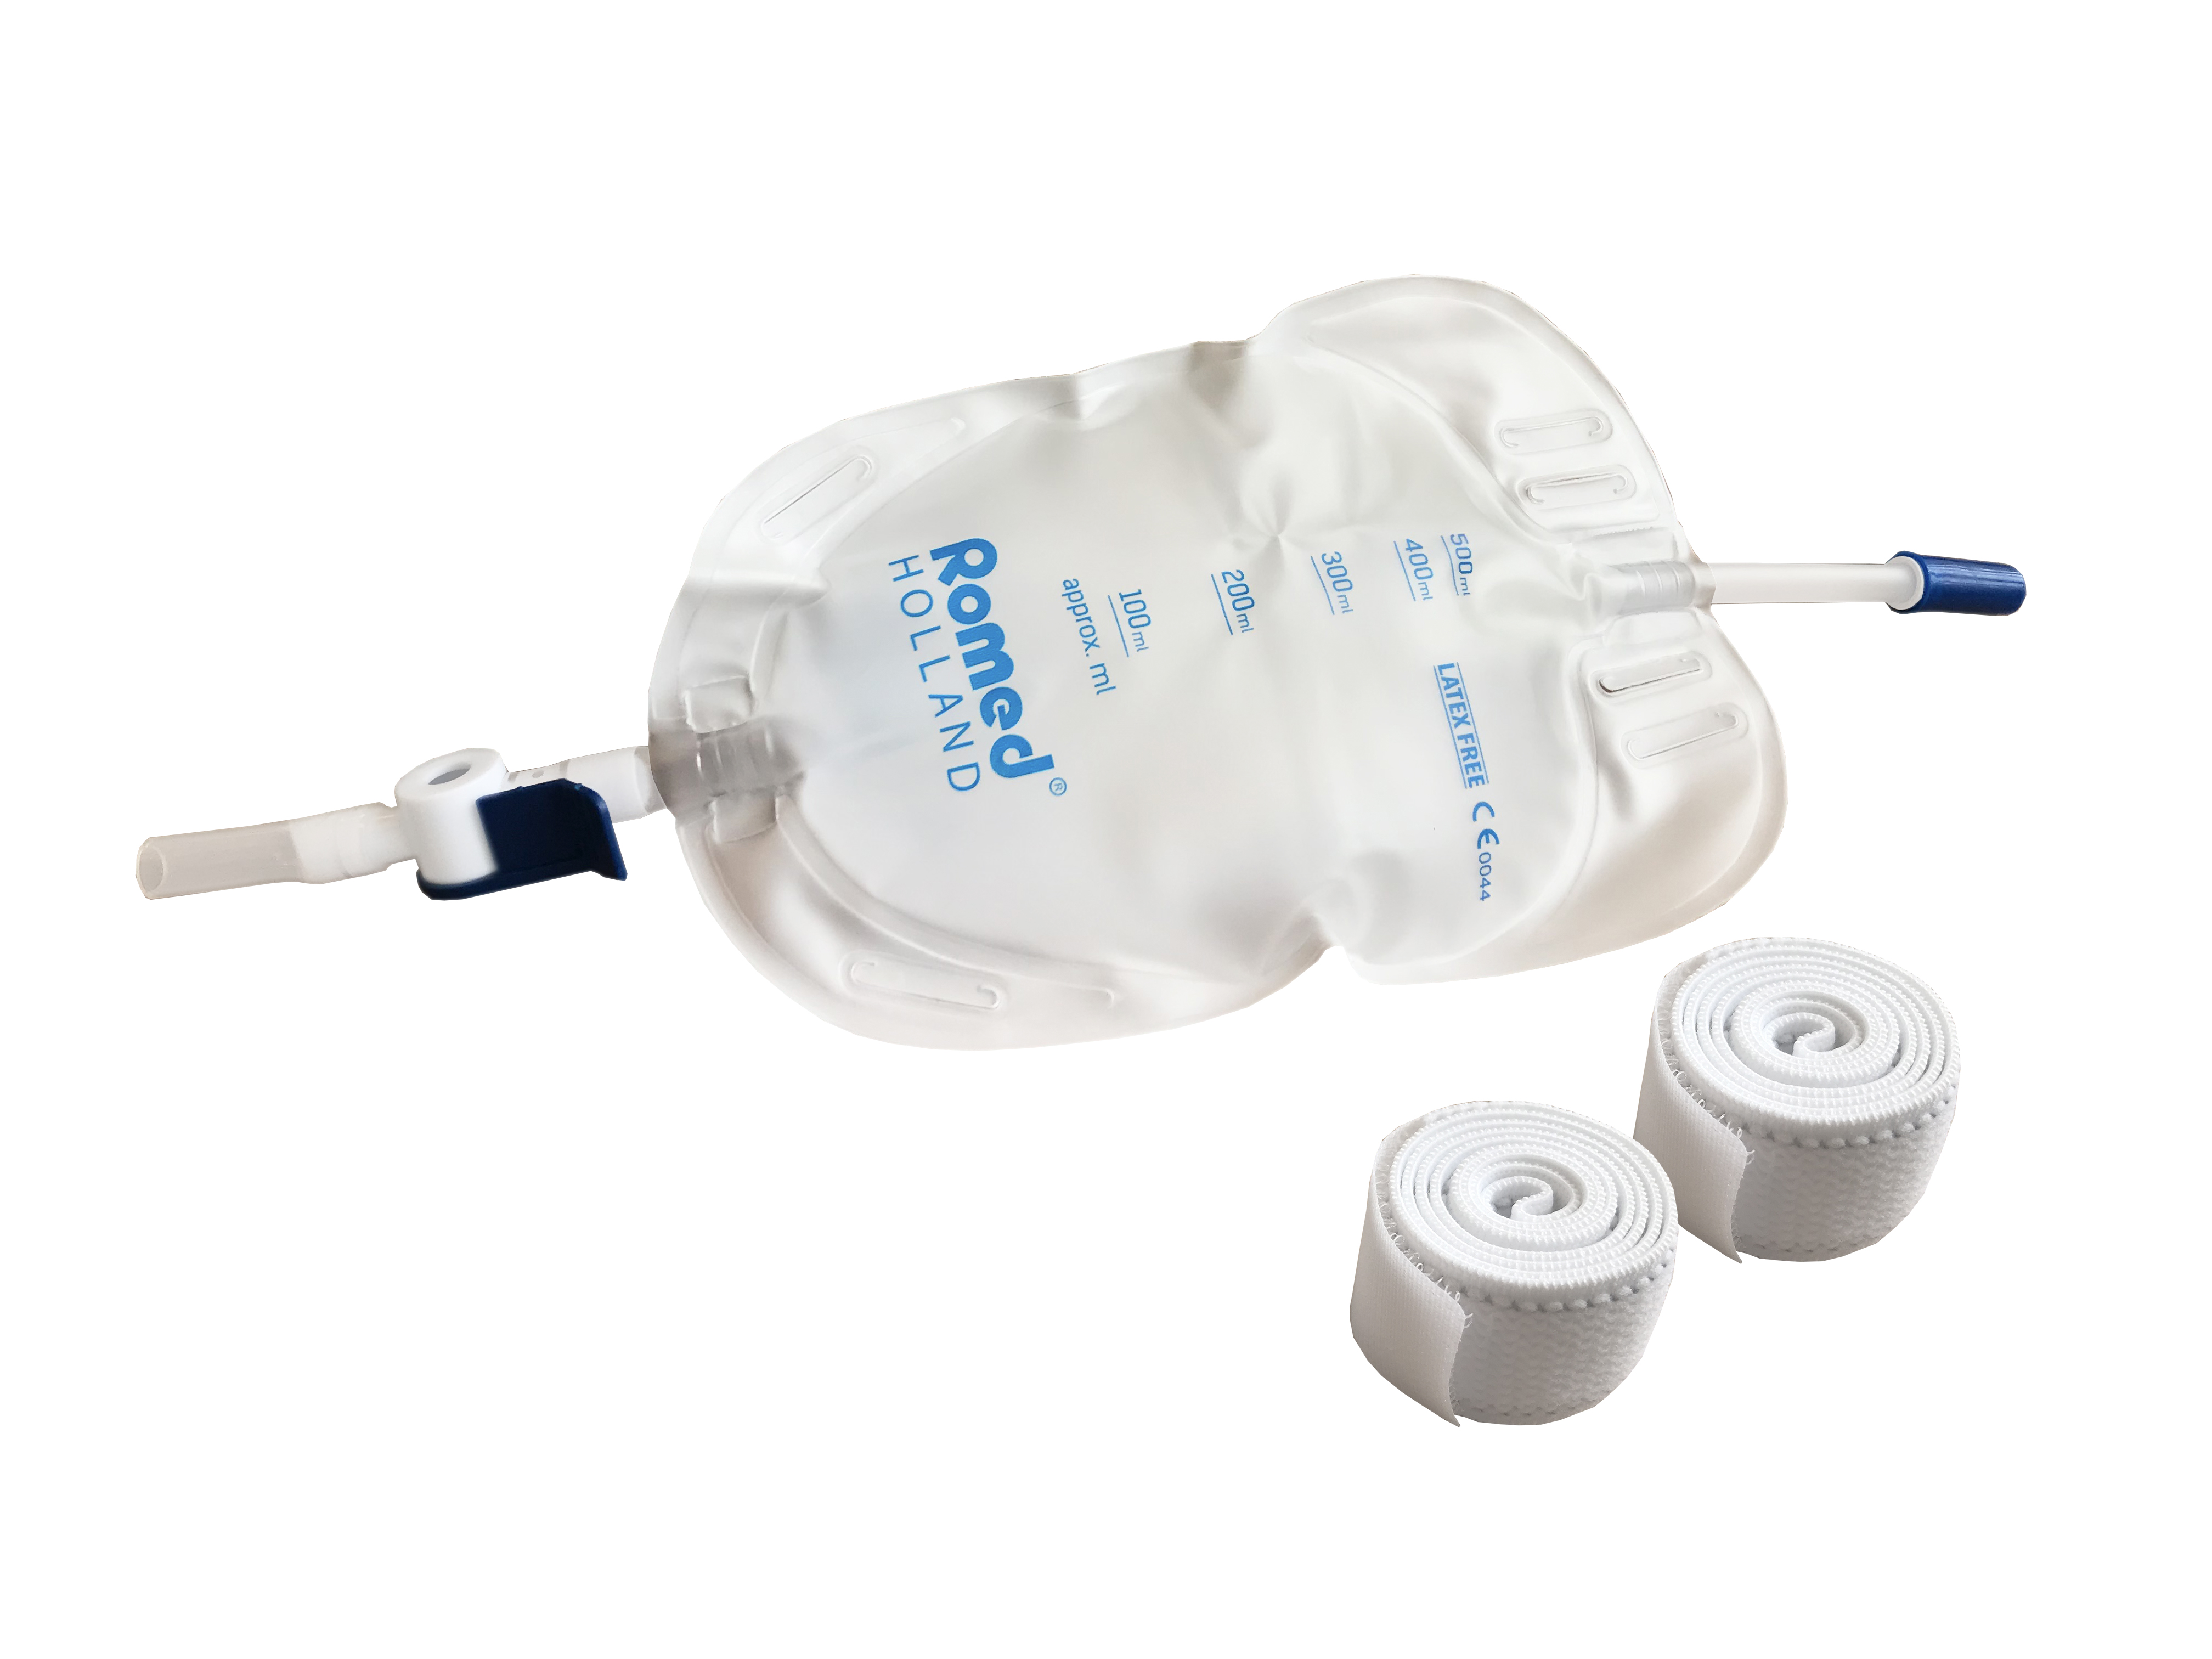 LB500ML-SOFT Romed urine leg bags soft, 500ml, with non return valve and lever tap, sterile per piece, 10 pcs in a box, 80 pcs in an export carton.